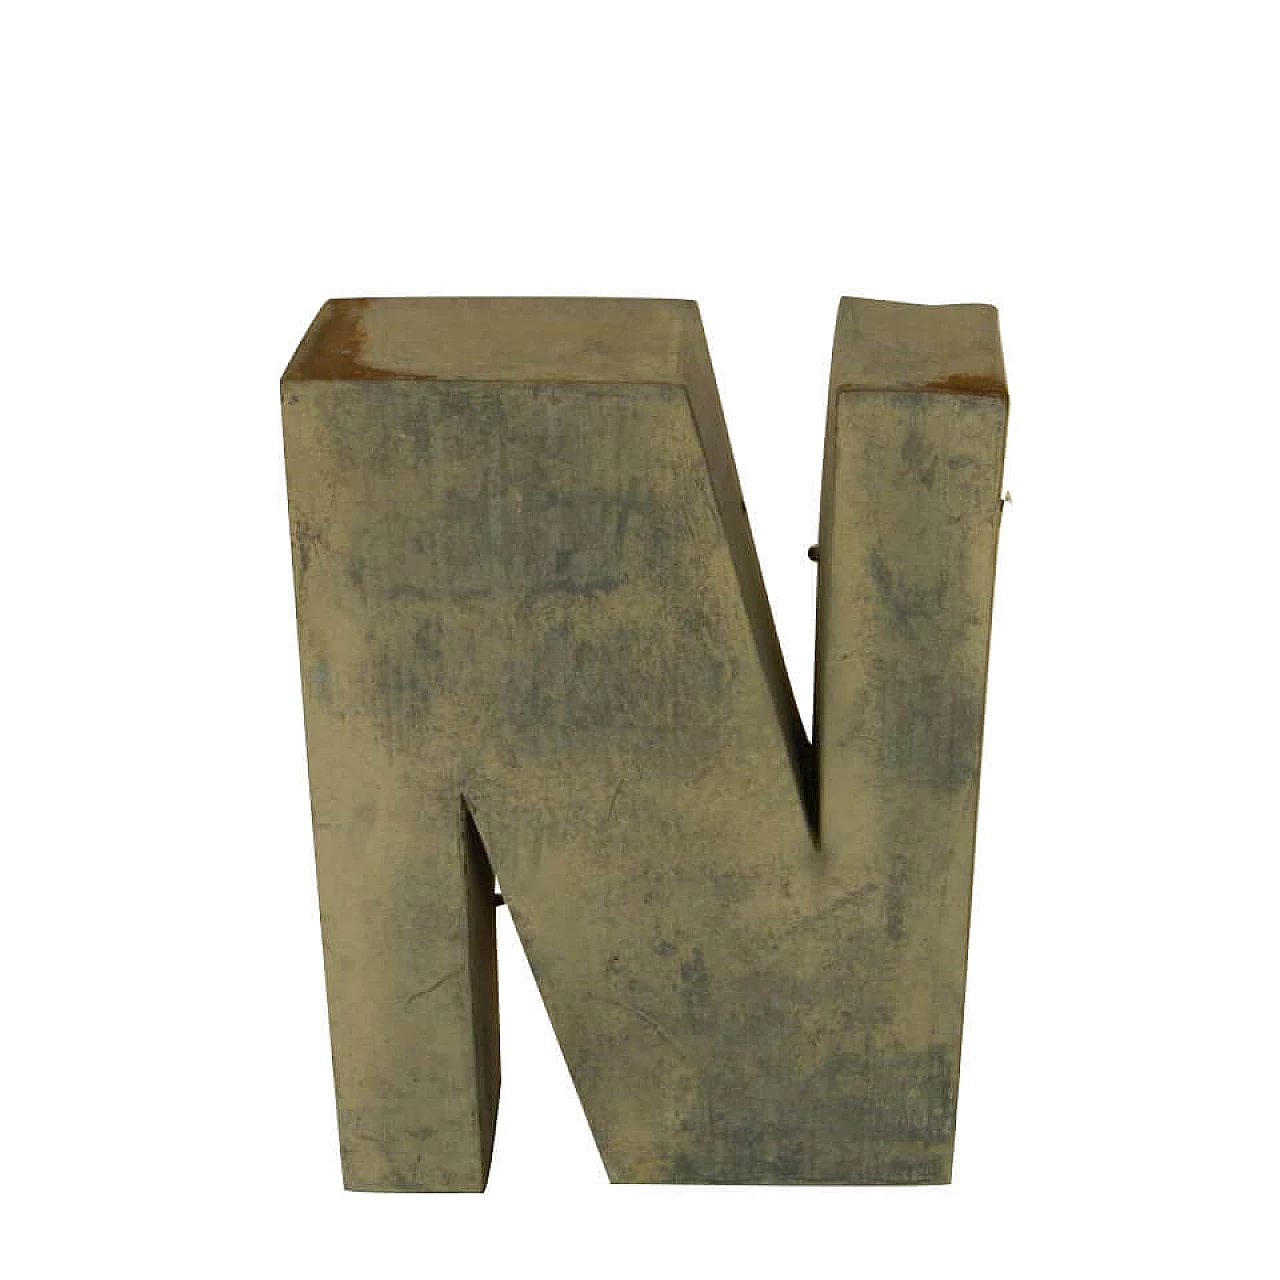 Wall decor capital letter N made in tin, 70s 1102462